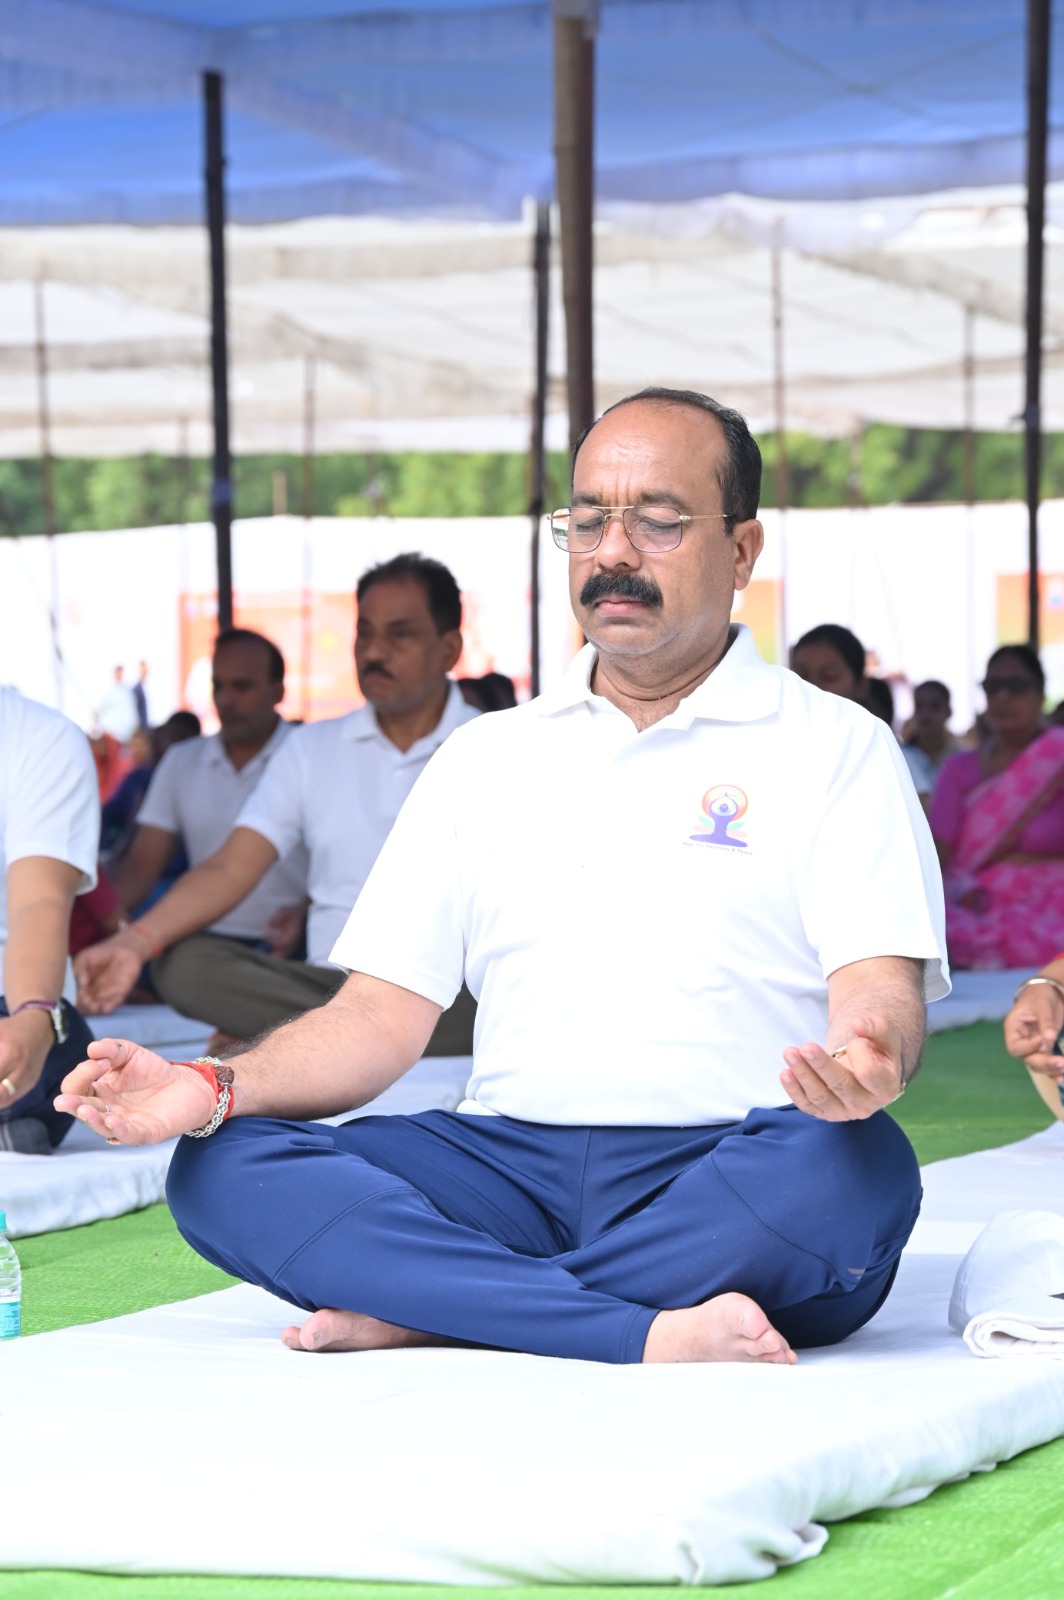 Deputy Chief Minister Arun Saw participated in the yoga practice